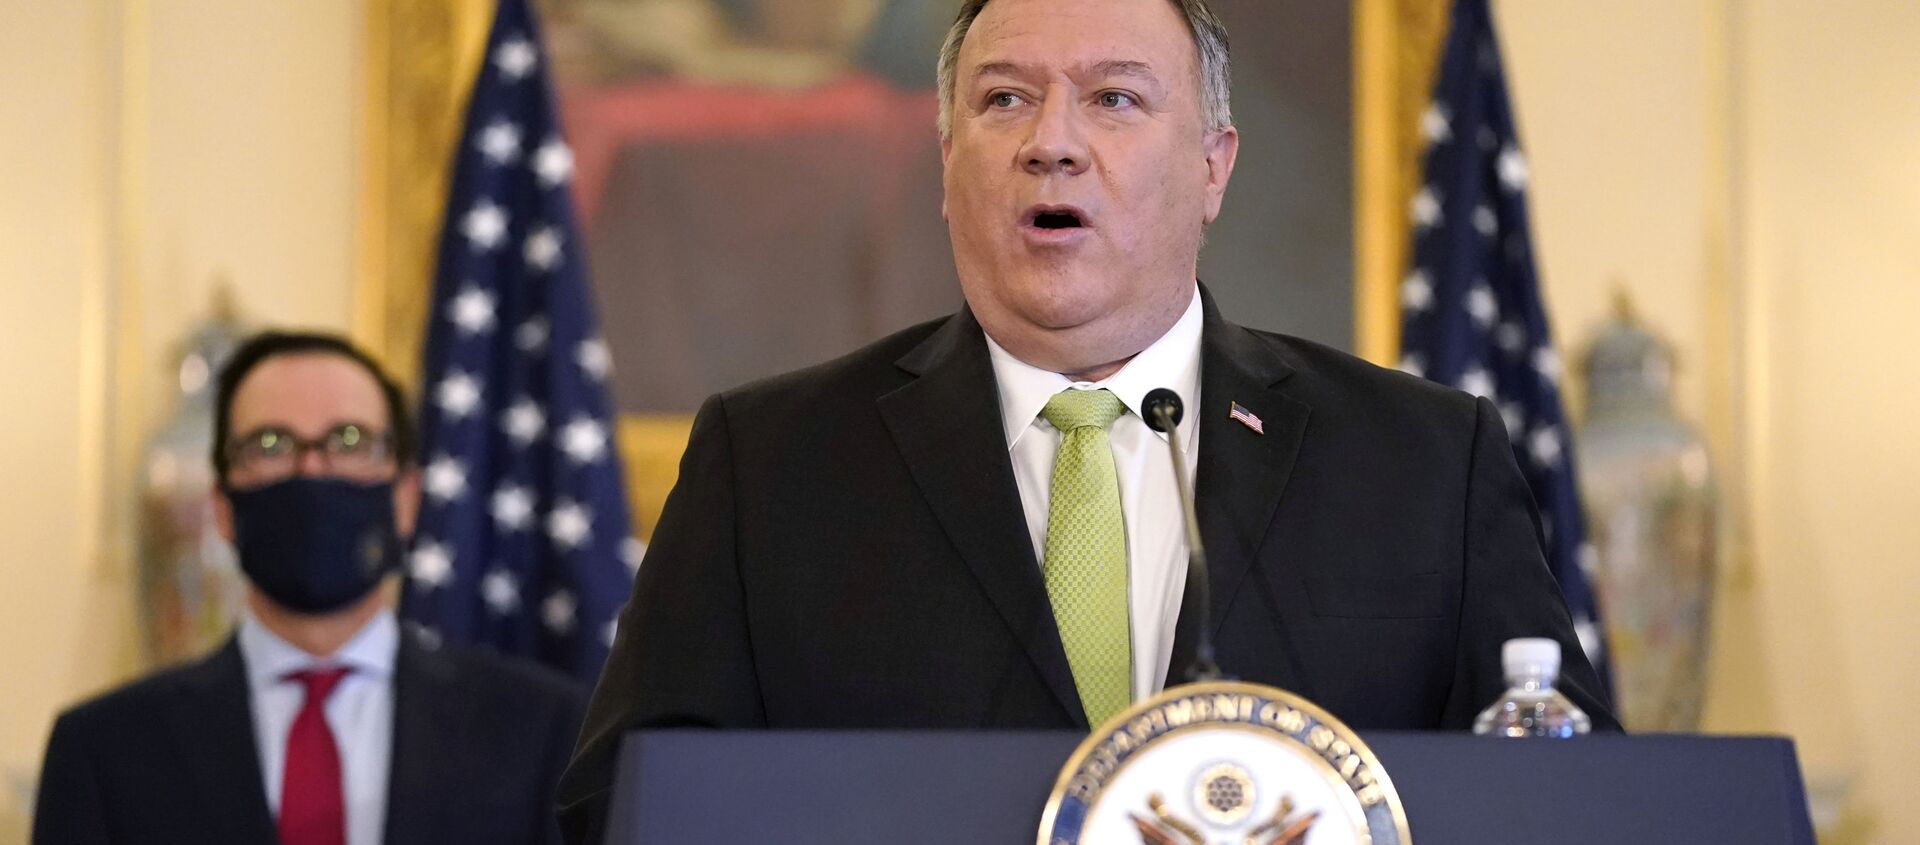 Secretary of State Mike Pompeo speaks during a news conference to announce the Trump administration's restoration of sanctions on Iran, Monday, Sept. 21, 2020, at the U.S. State Department in Washington. Standing behind Pompeo is Treasury Secretary Steve Mnuchin. - Sputnik 日本, 1920, 04.03.2021